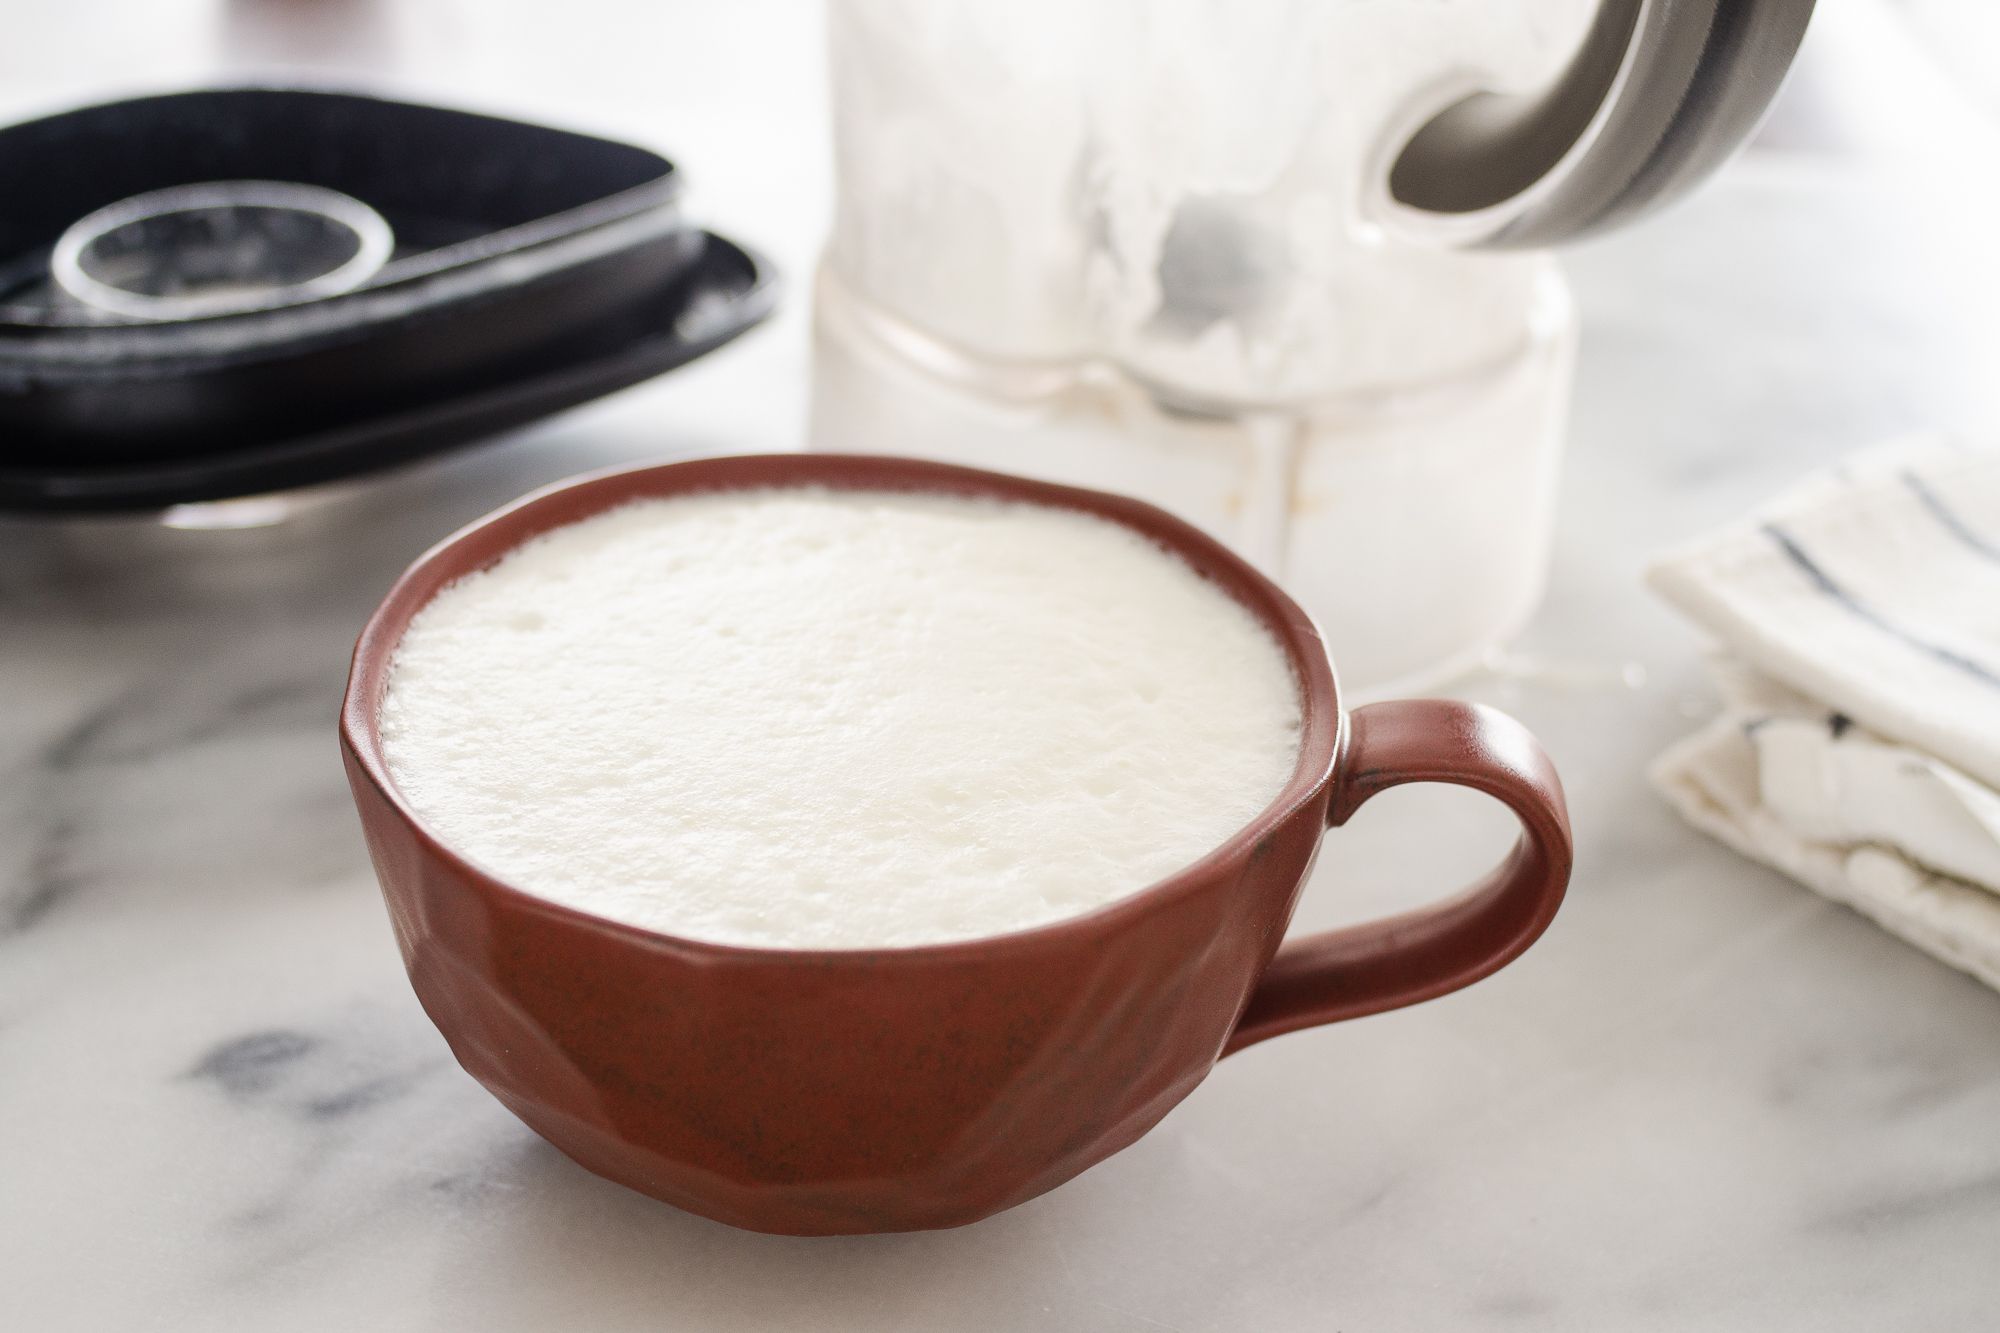 https://hips.hearstapps.com/thepioneerwoman/wp-content/uploads/2017/01/how-to-froth-milk-without-an-espresso-machine-10.jpg